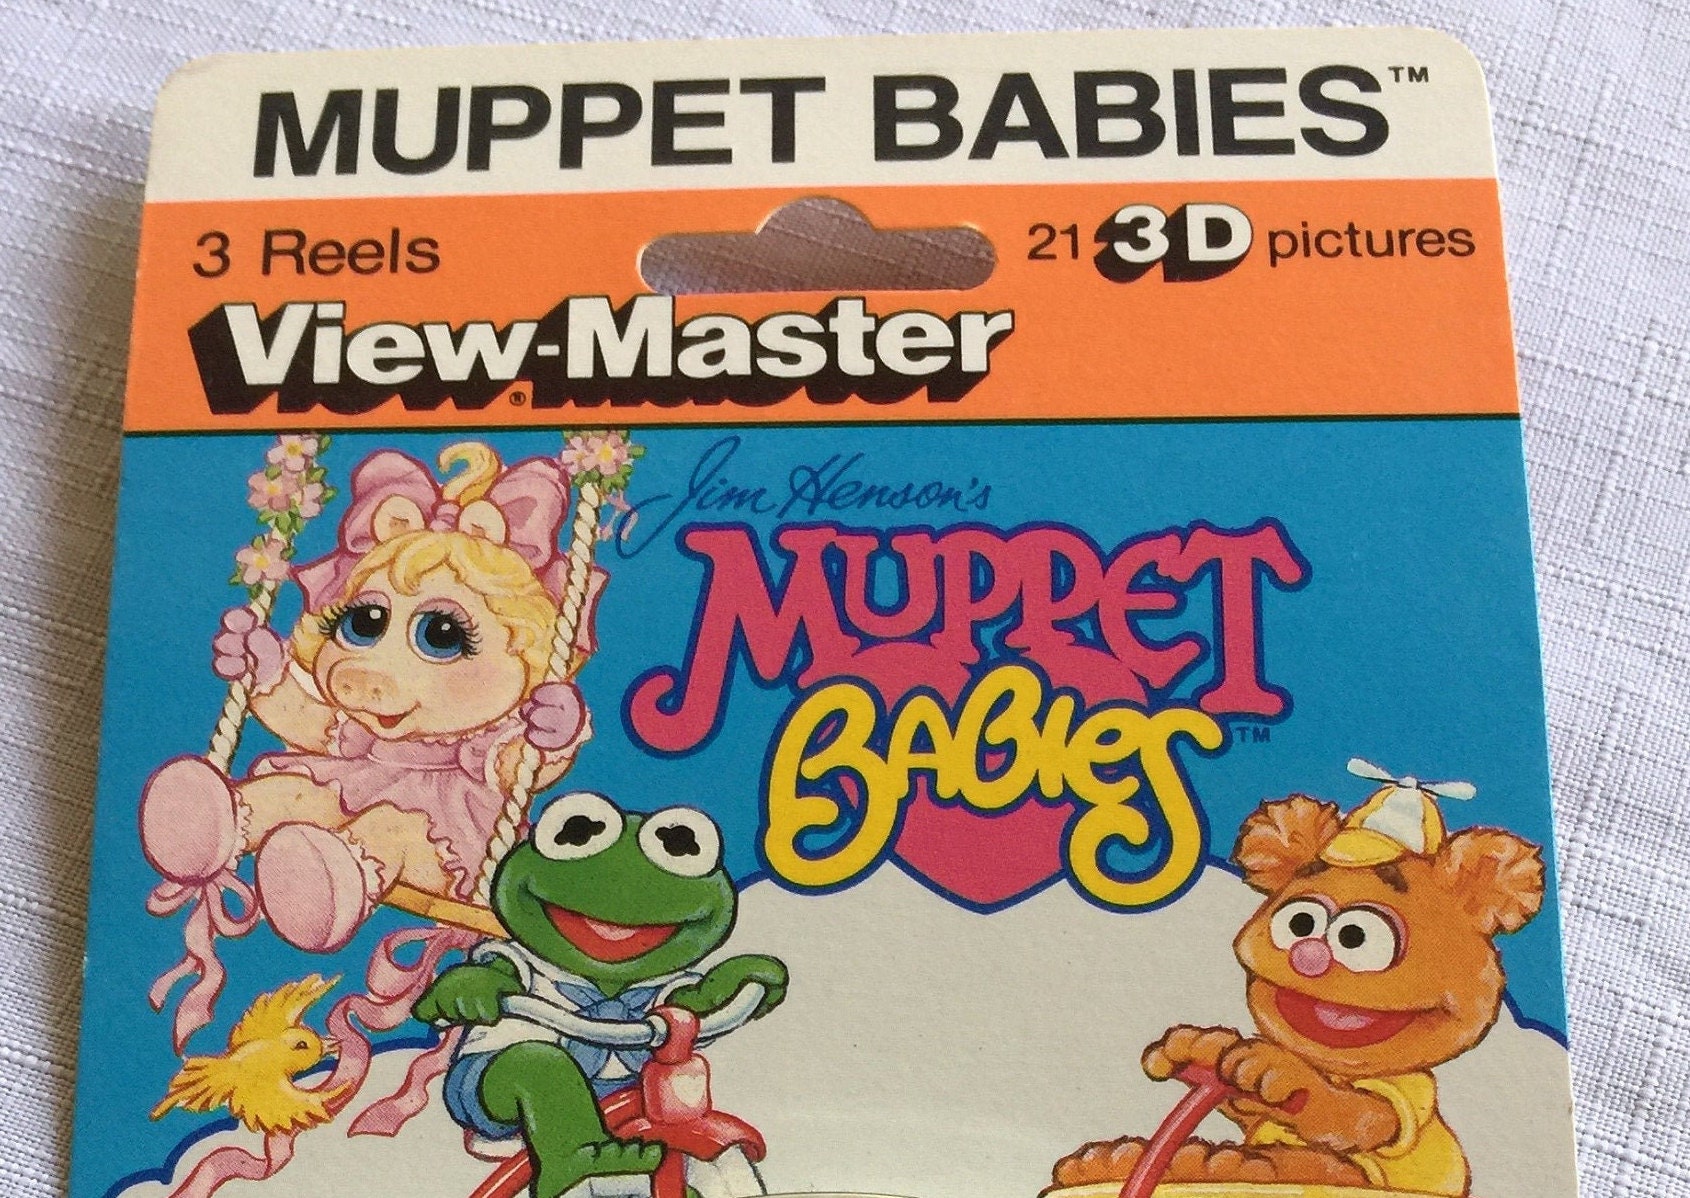 Muppet Viewmaster, Muppets, Sesame Street, Viewmaster, 3-D Toy